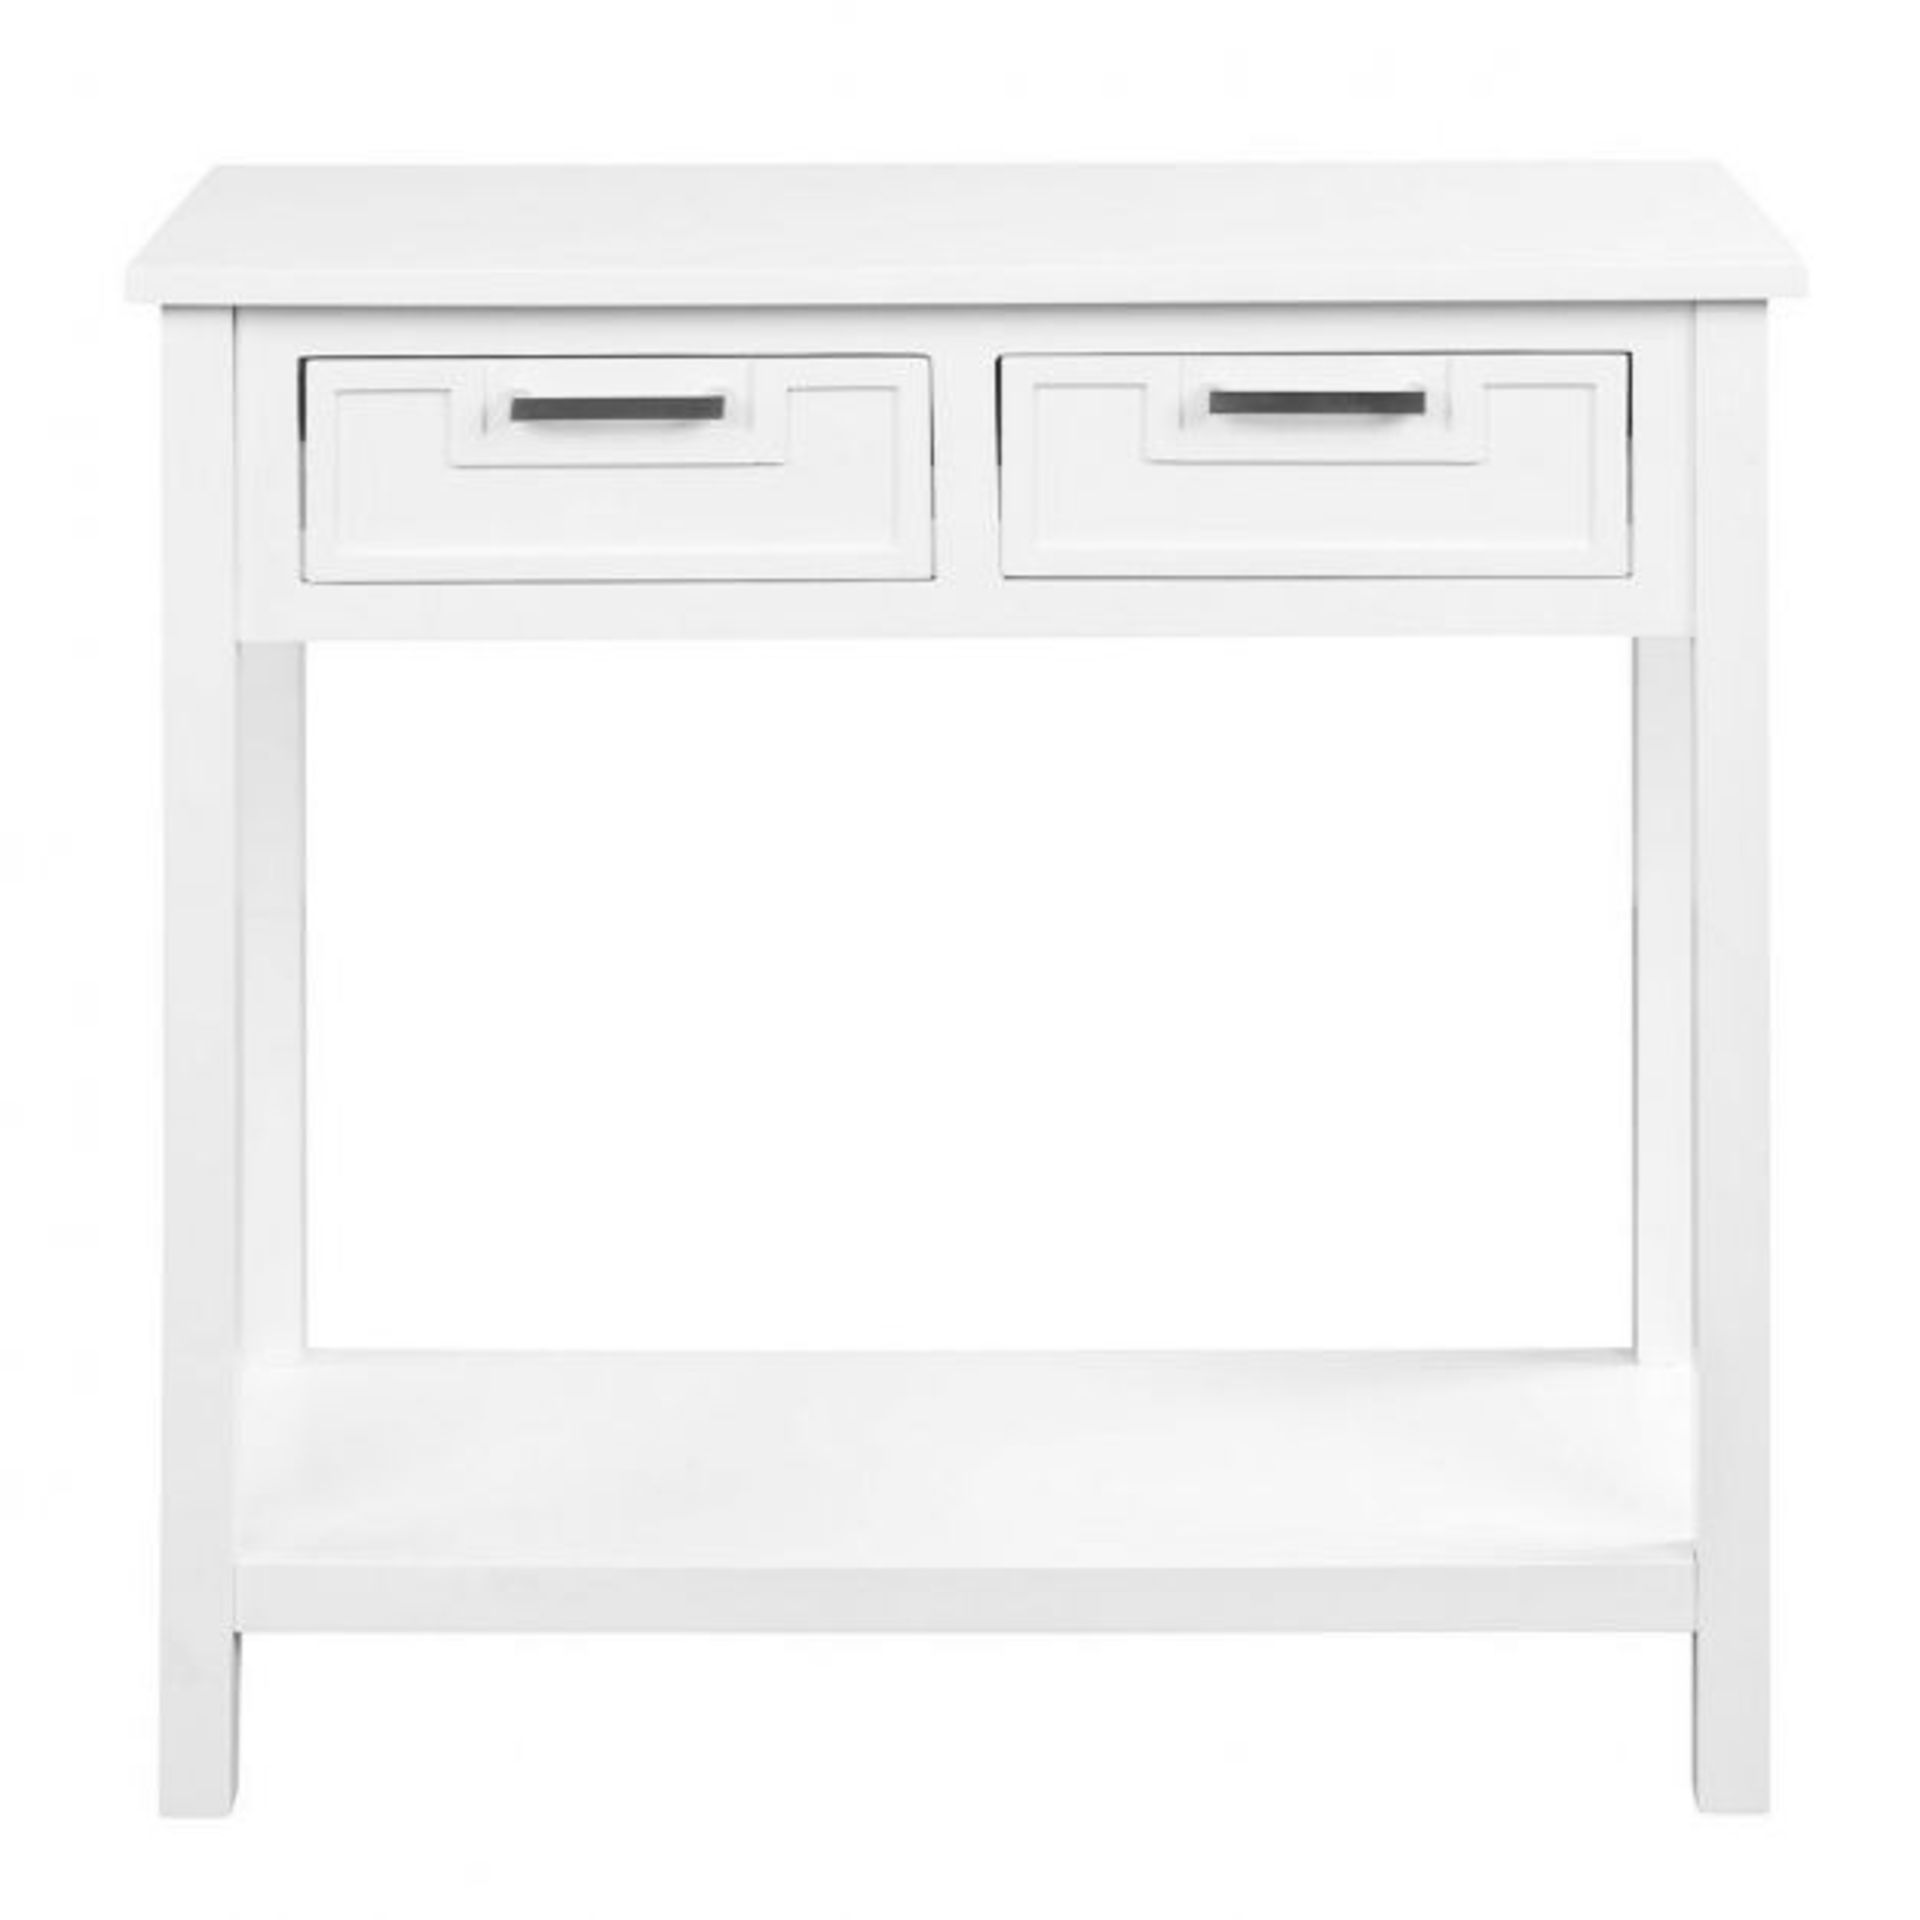 Retro Accent Sofa Table with Open Storage Shelf - ER53